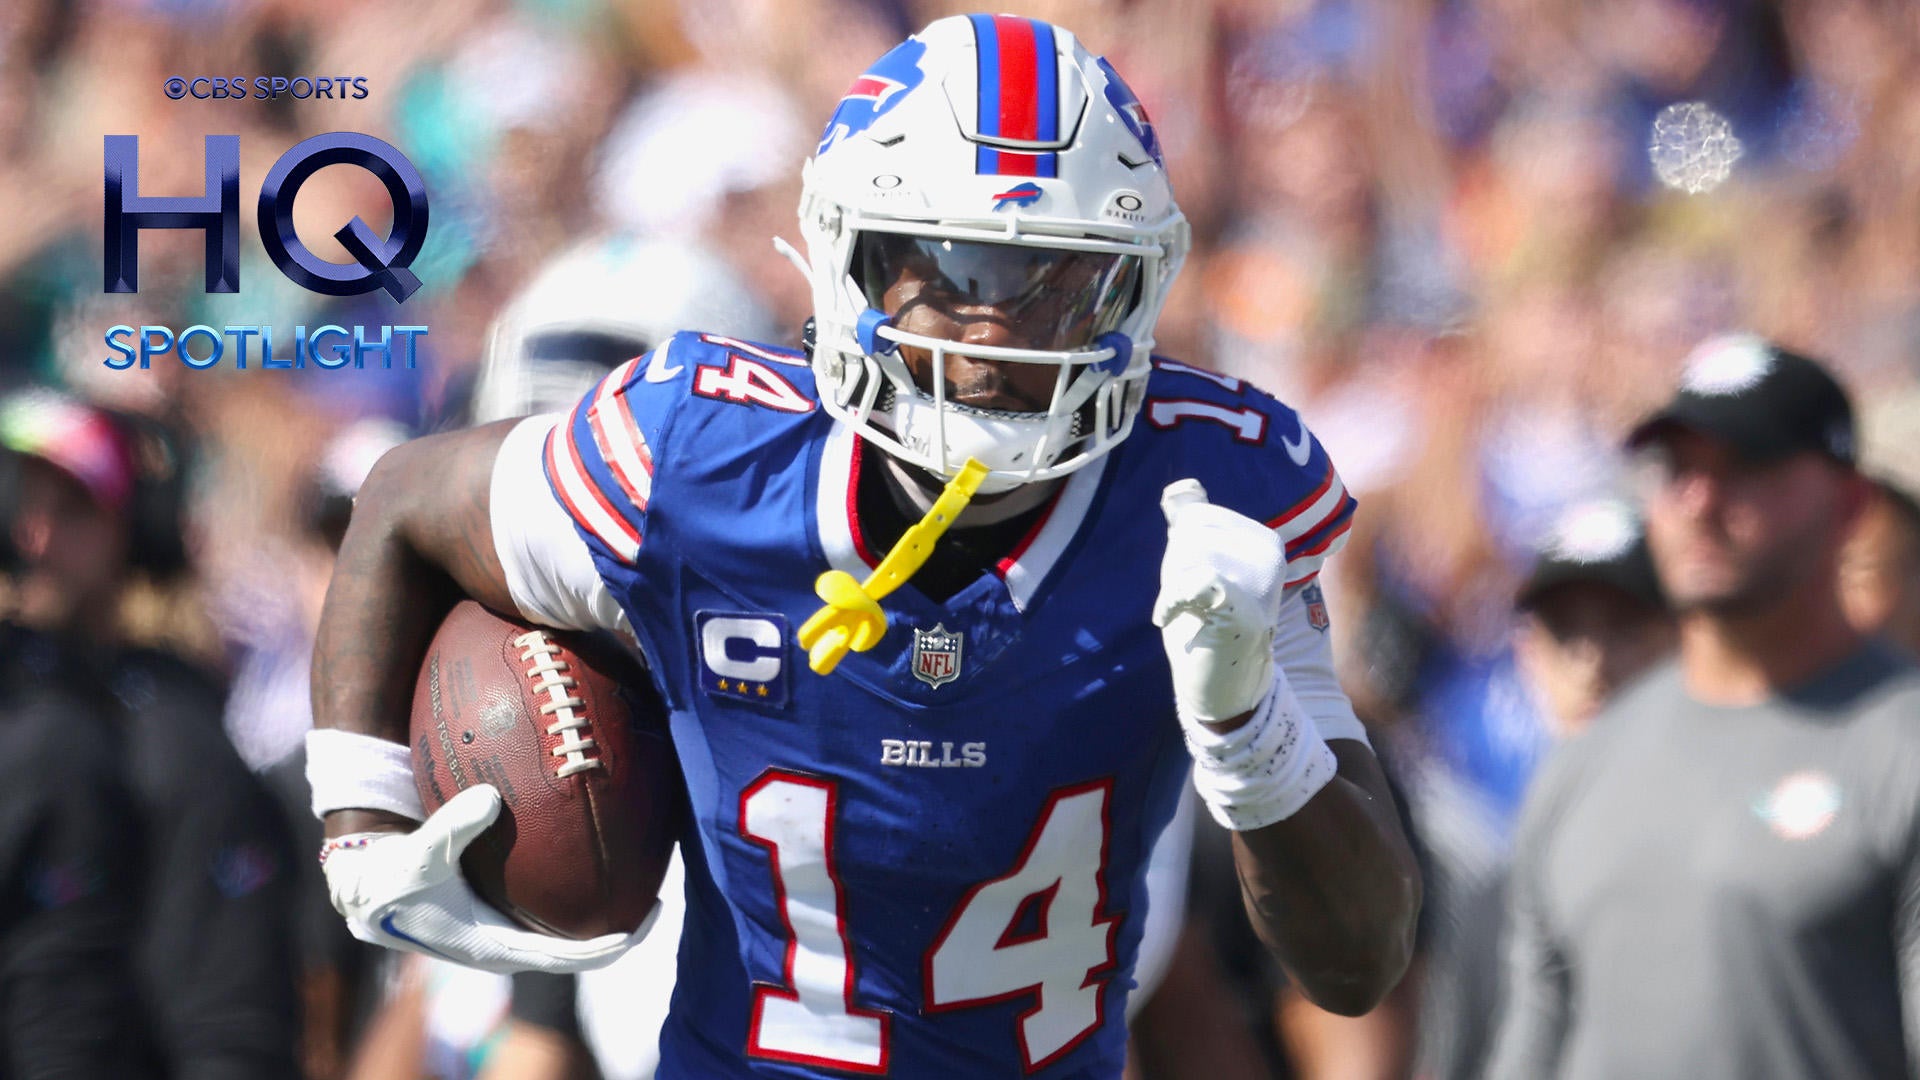 HQ Spotlight: Bills Rise to 3-1 After Taking Down the Streaking Dolphins 